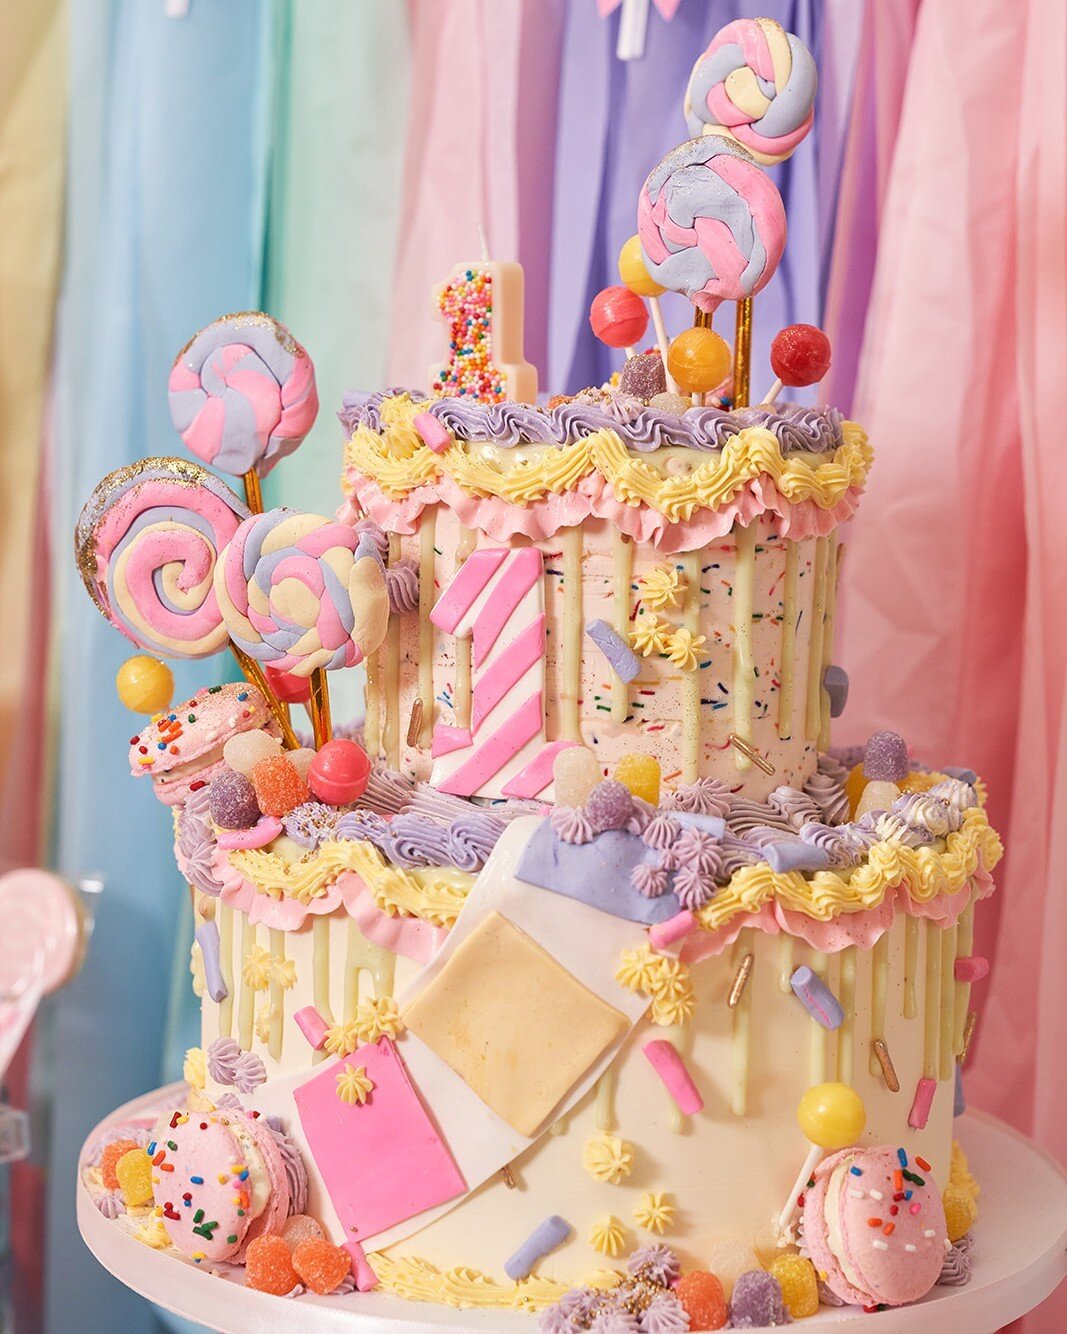 A sweet throwback to Rosey Land🍭

Fun fact: Choosing unique and fun party themes is our speciality! 

All parties have a theme, whether it&rsquo;s &ldquo;just because&rdquo; or celebrating a specific holiday. If you choose to have a &ldquo;just beca